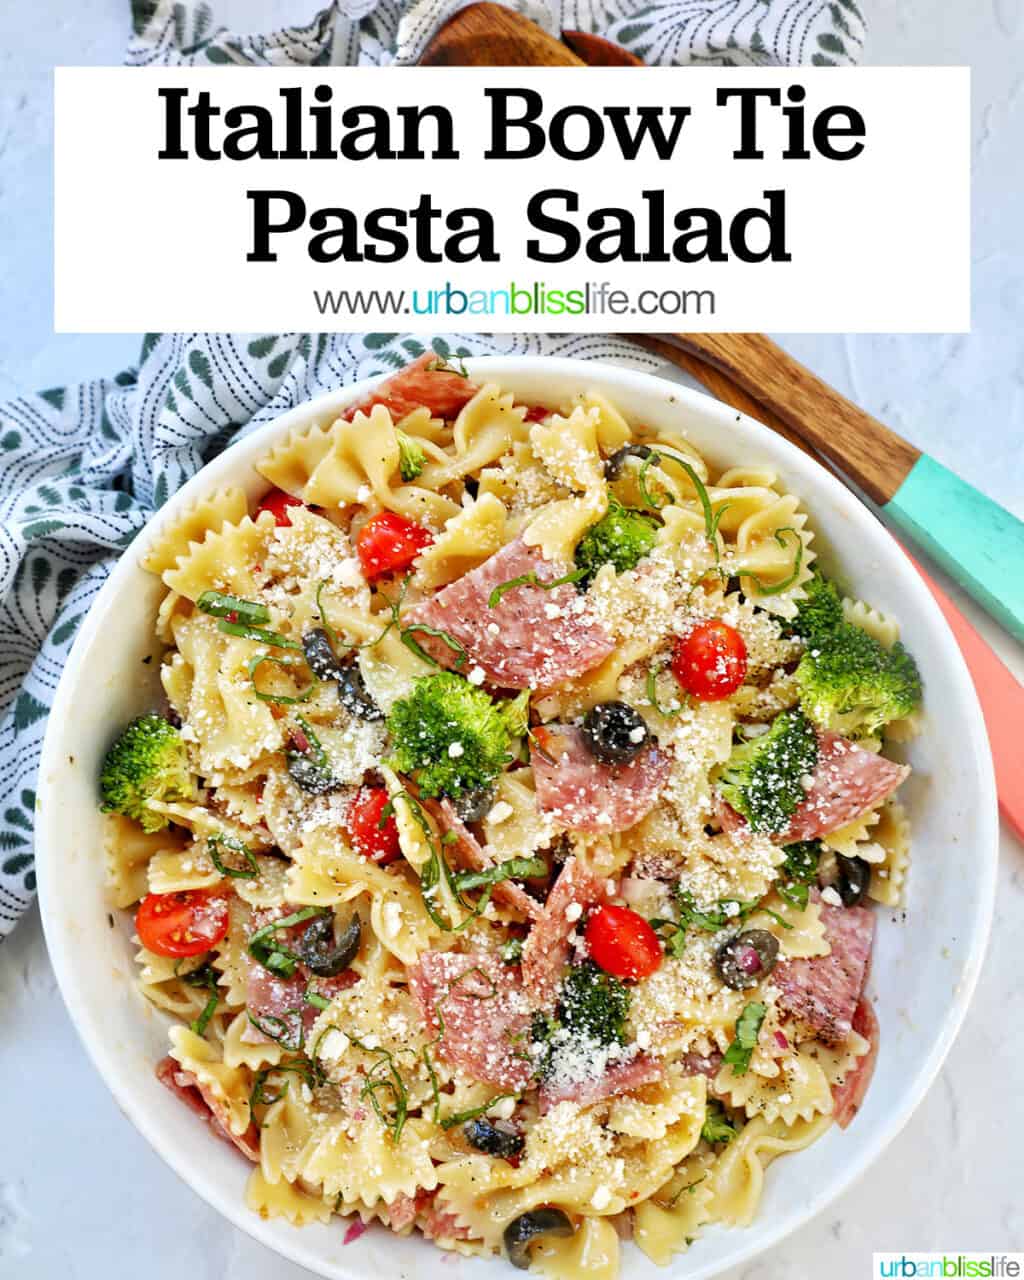 Italian bowtie pasta salad with salami, olives, tomatoes, broccoli, and parmesan cheese in a white bowl with title text that reads "Italian Bow Tie Pasta Salad."